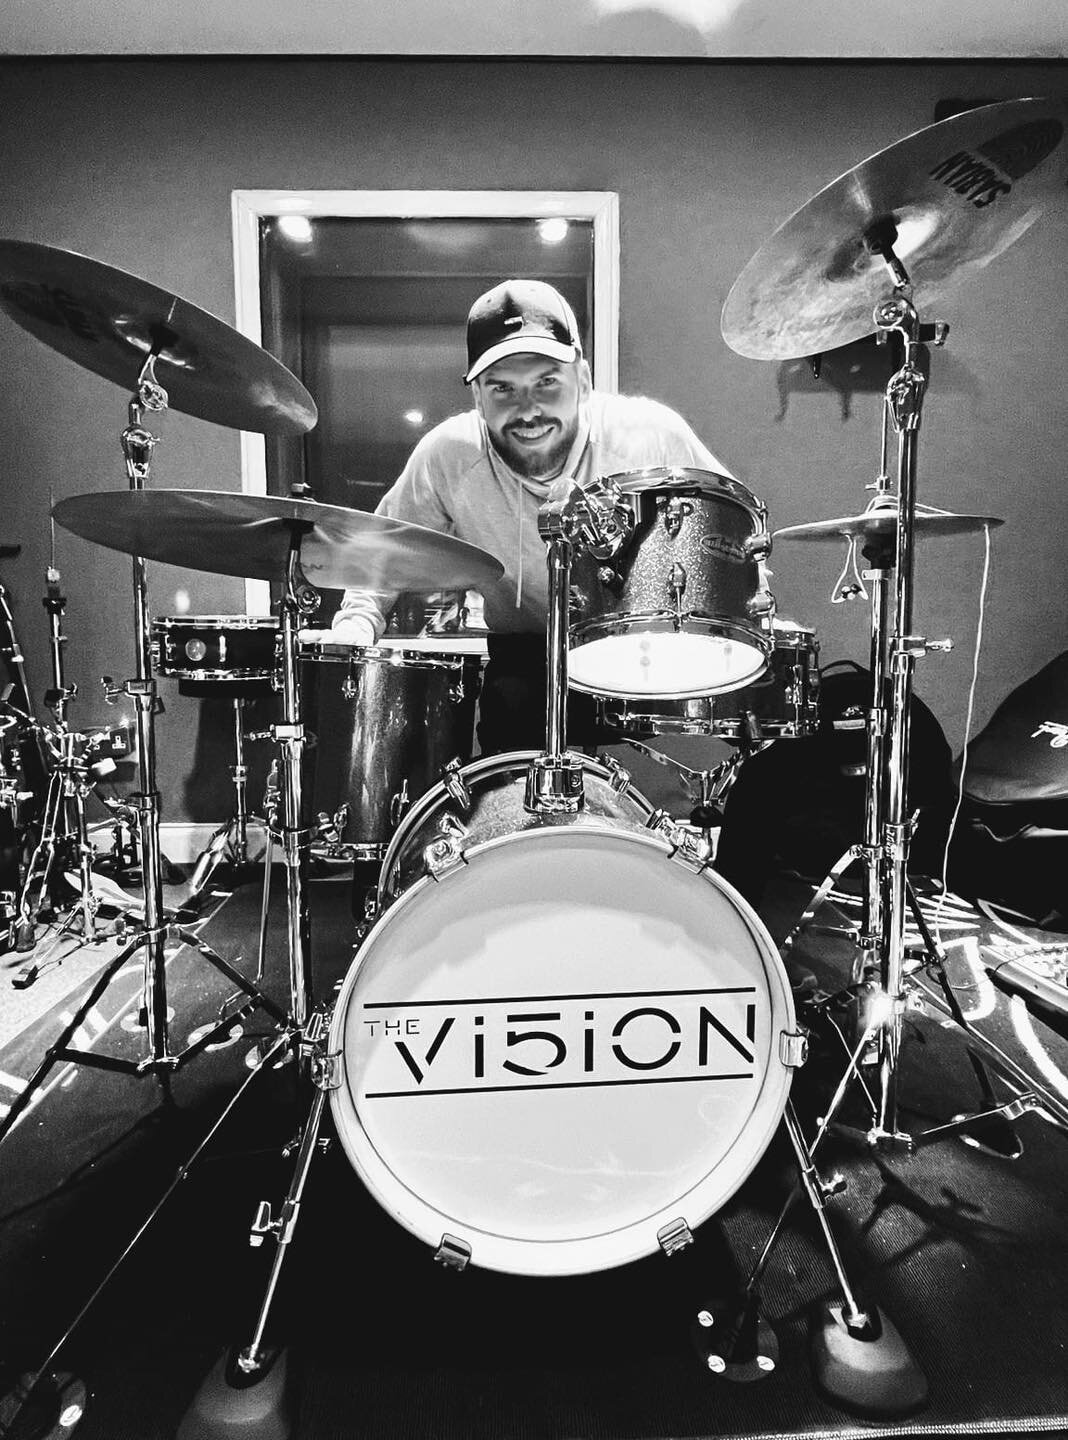 Jimmy on Thursday night at practice, before all heck broke loose! Certainly been a great addition for The Vi5ion.

We bet you can&rsquo;t go past this post without liking it&hellip;

#thevi5ionband #livemusic #poprock #upcomingband #bringiton #upcomi